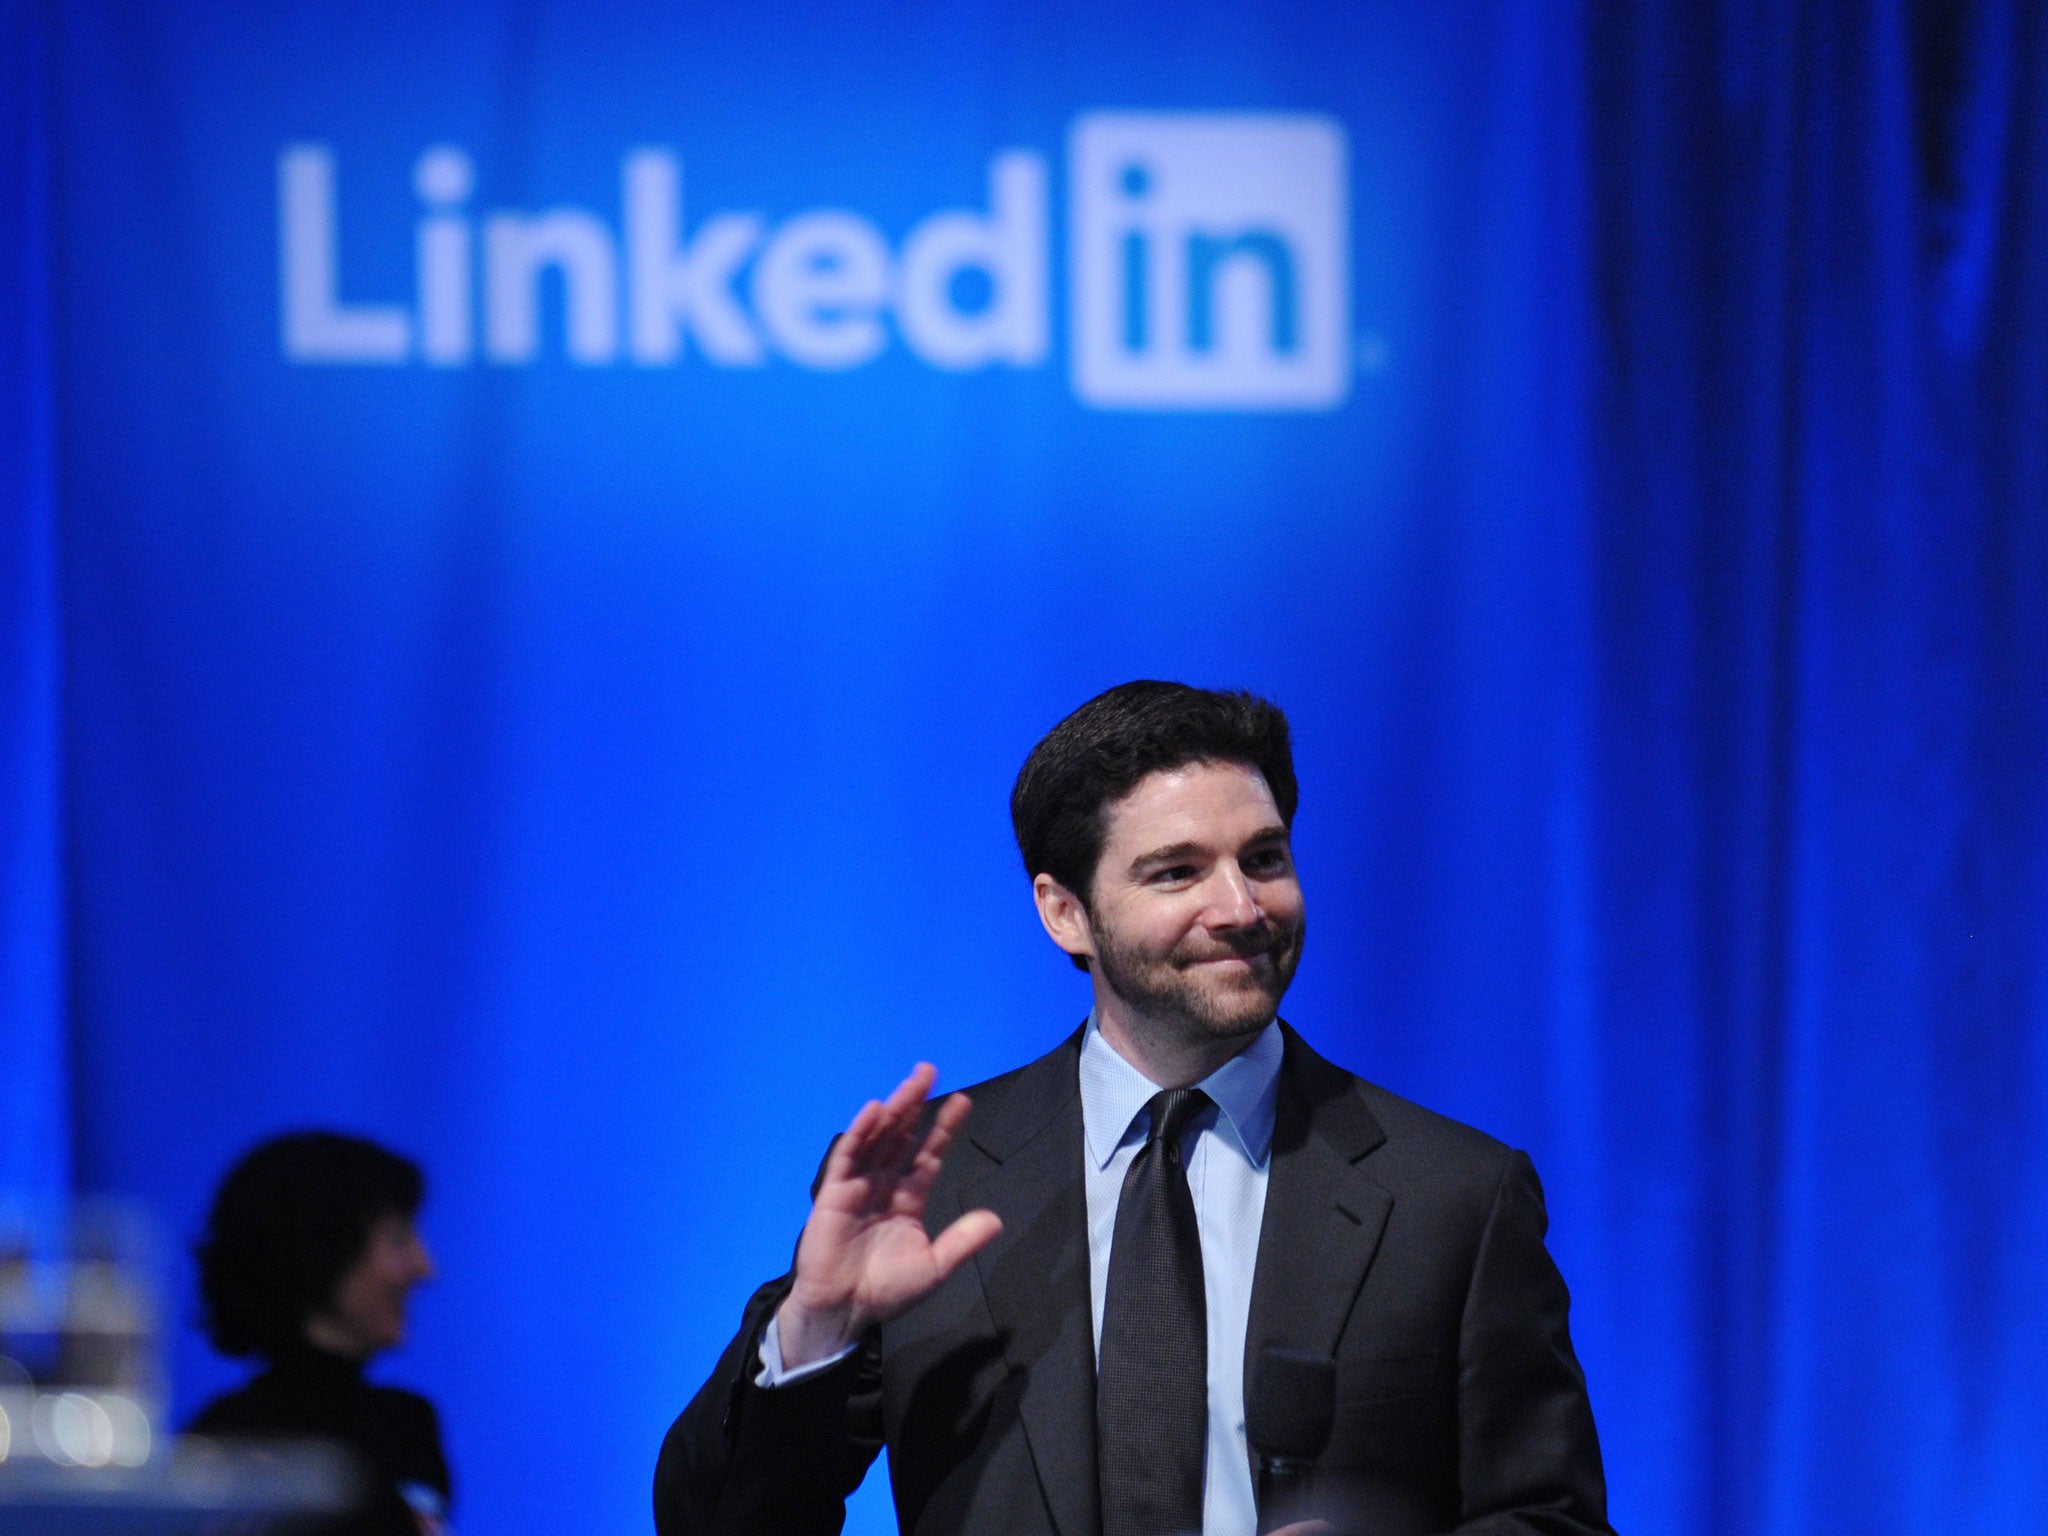 Linkedin CEO Jeff Weiner arrives at the Computer History Museum to host a Linkedin town hall meeting with US President Barack Obama September 26, 2011 in Mountain View, California